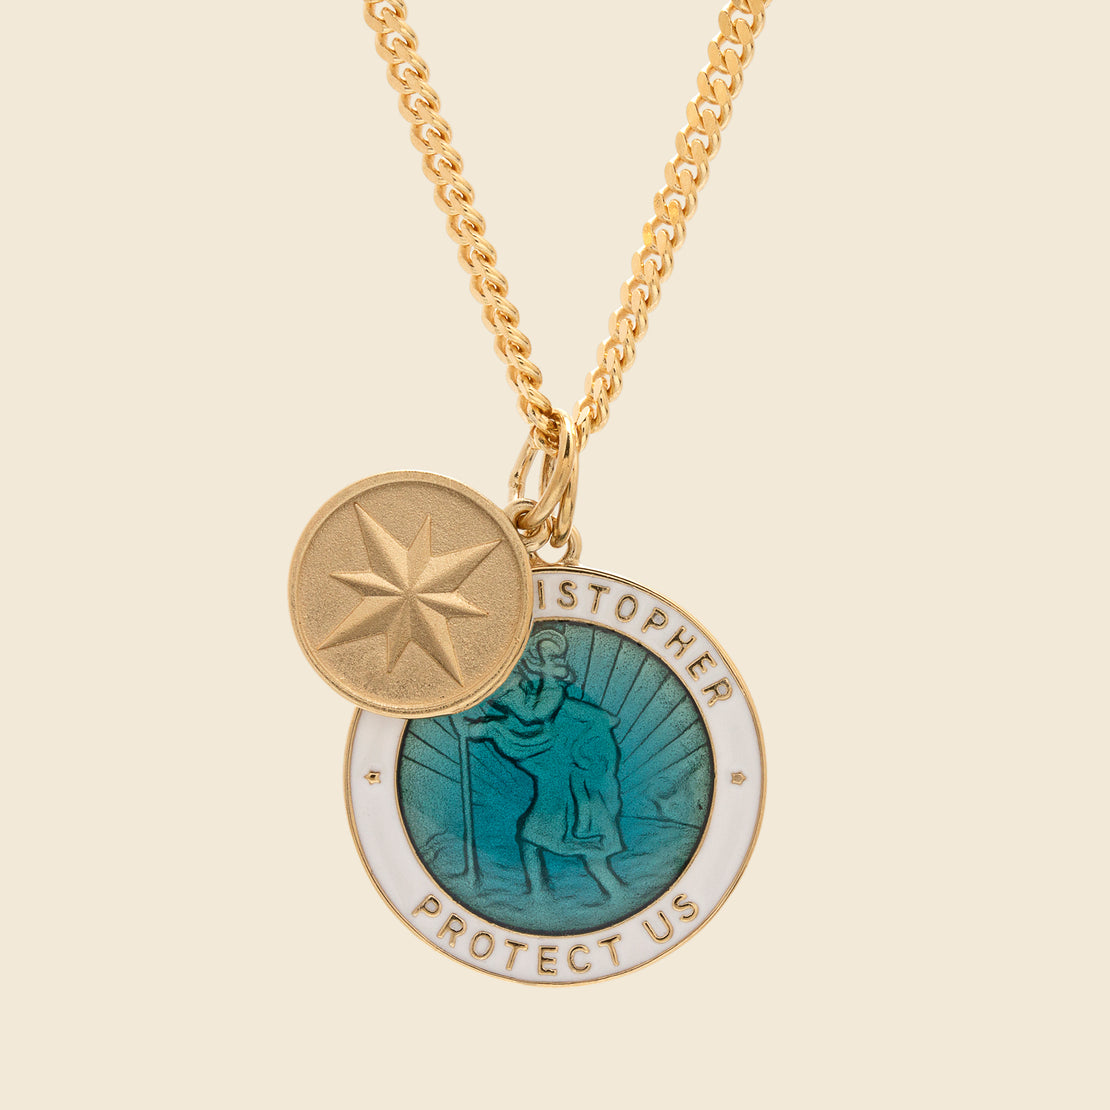 St. Christopher Necklace in Aqua & White // Get Back Necklaces